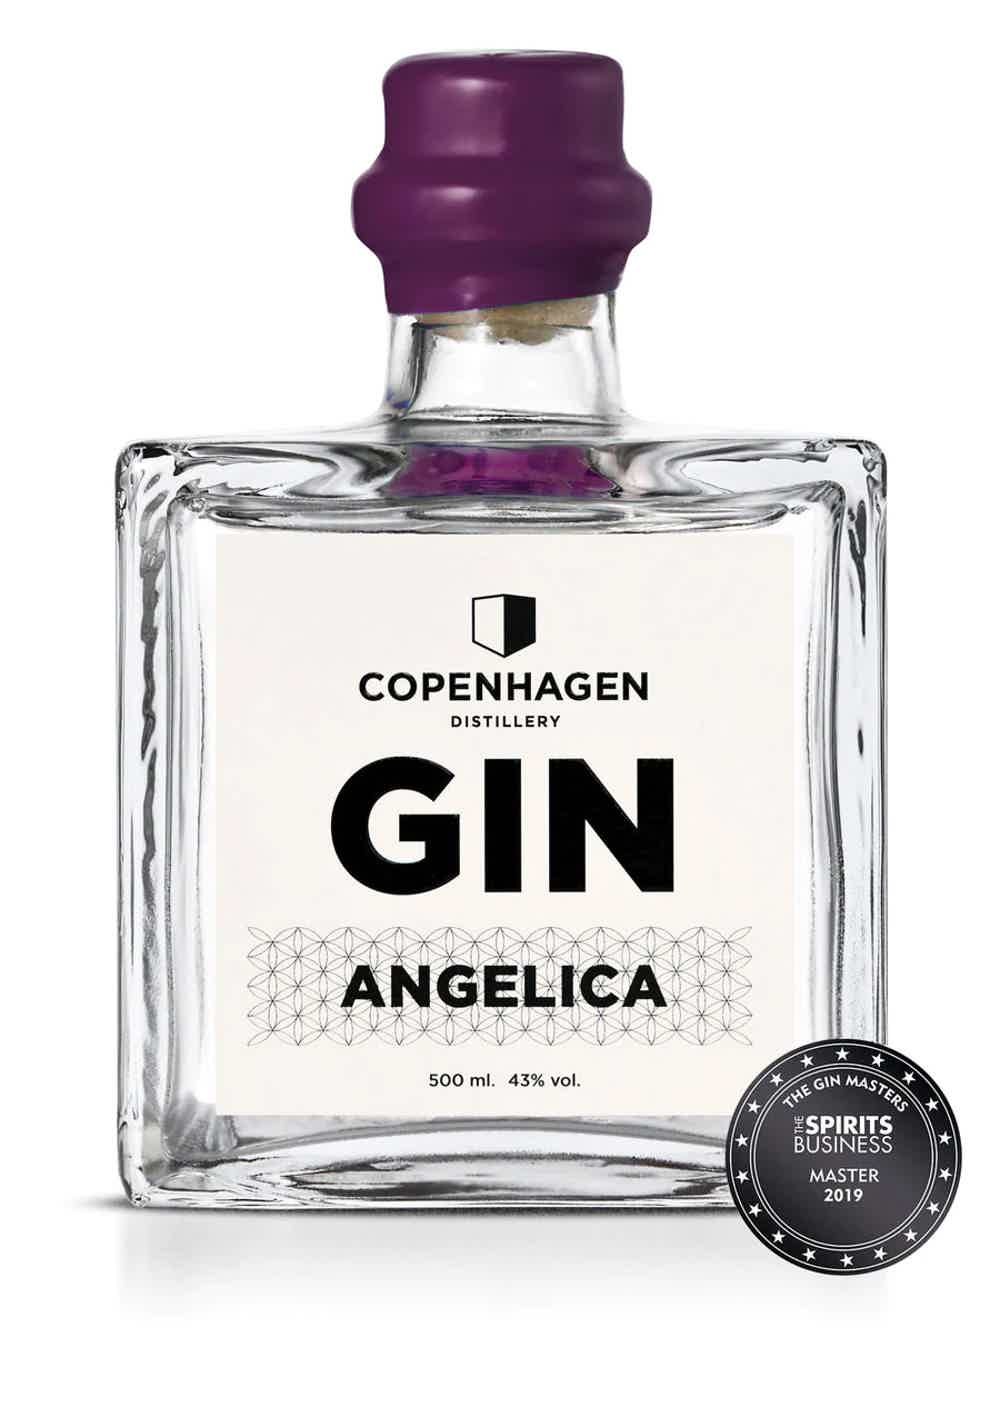 ANGELICA GIN